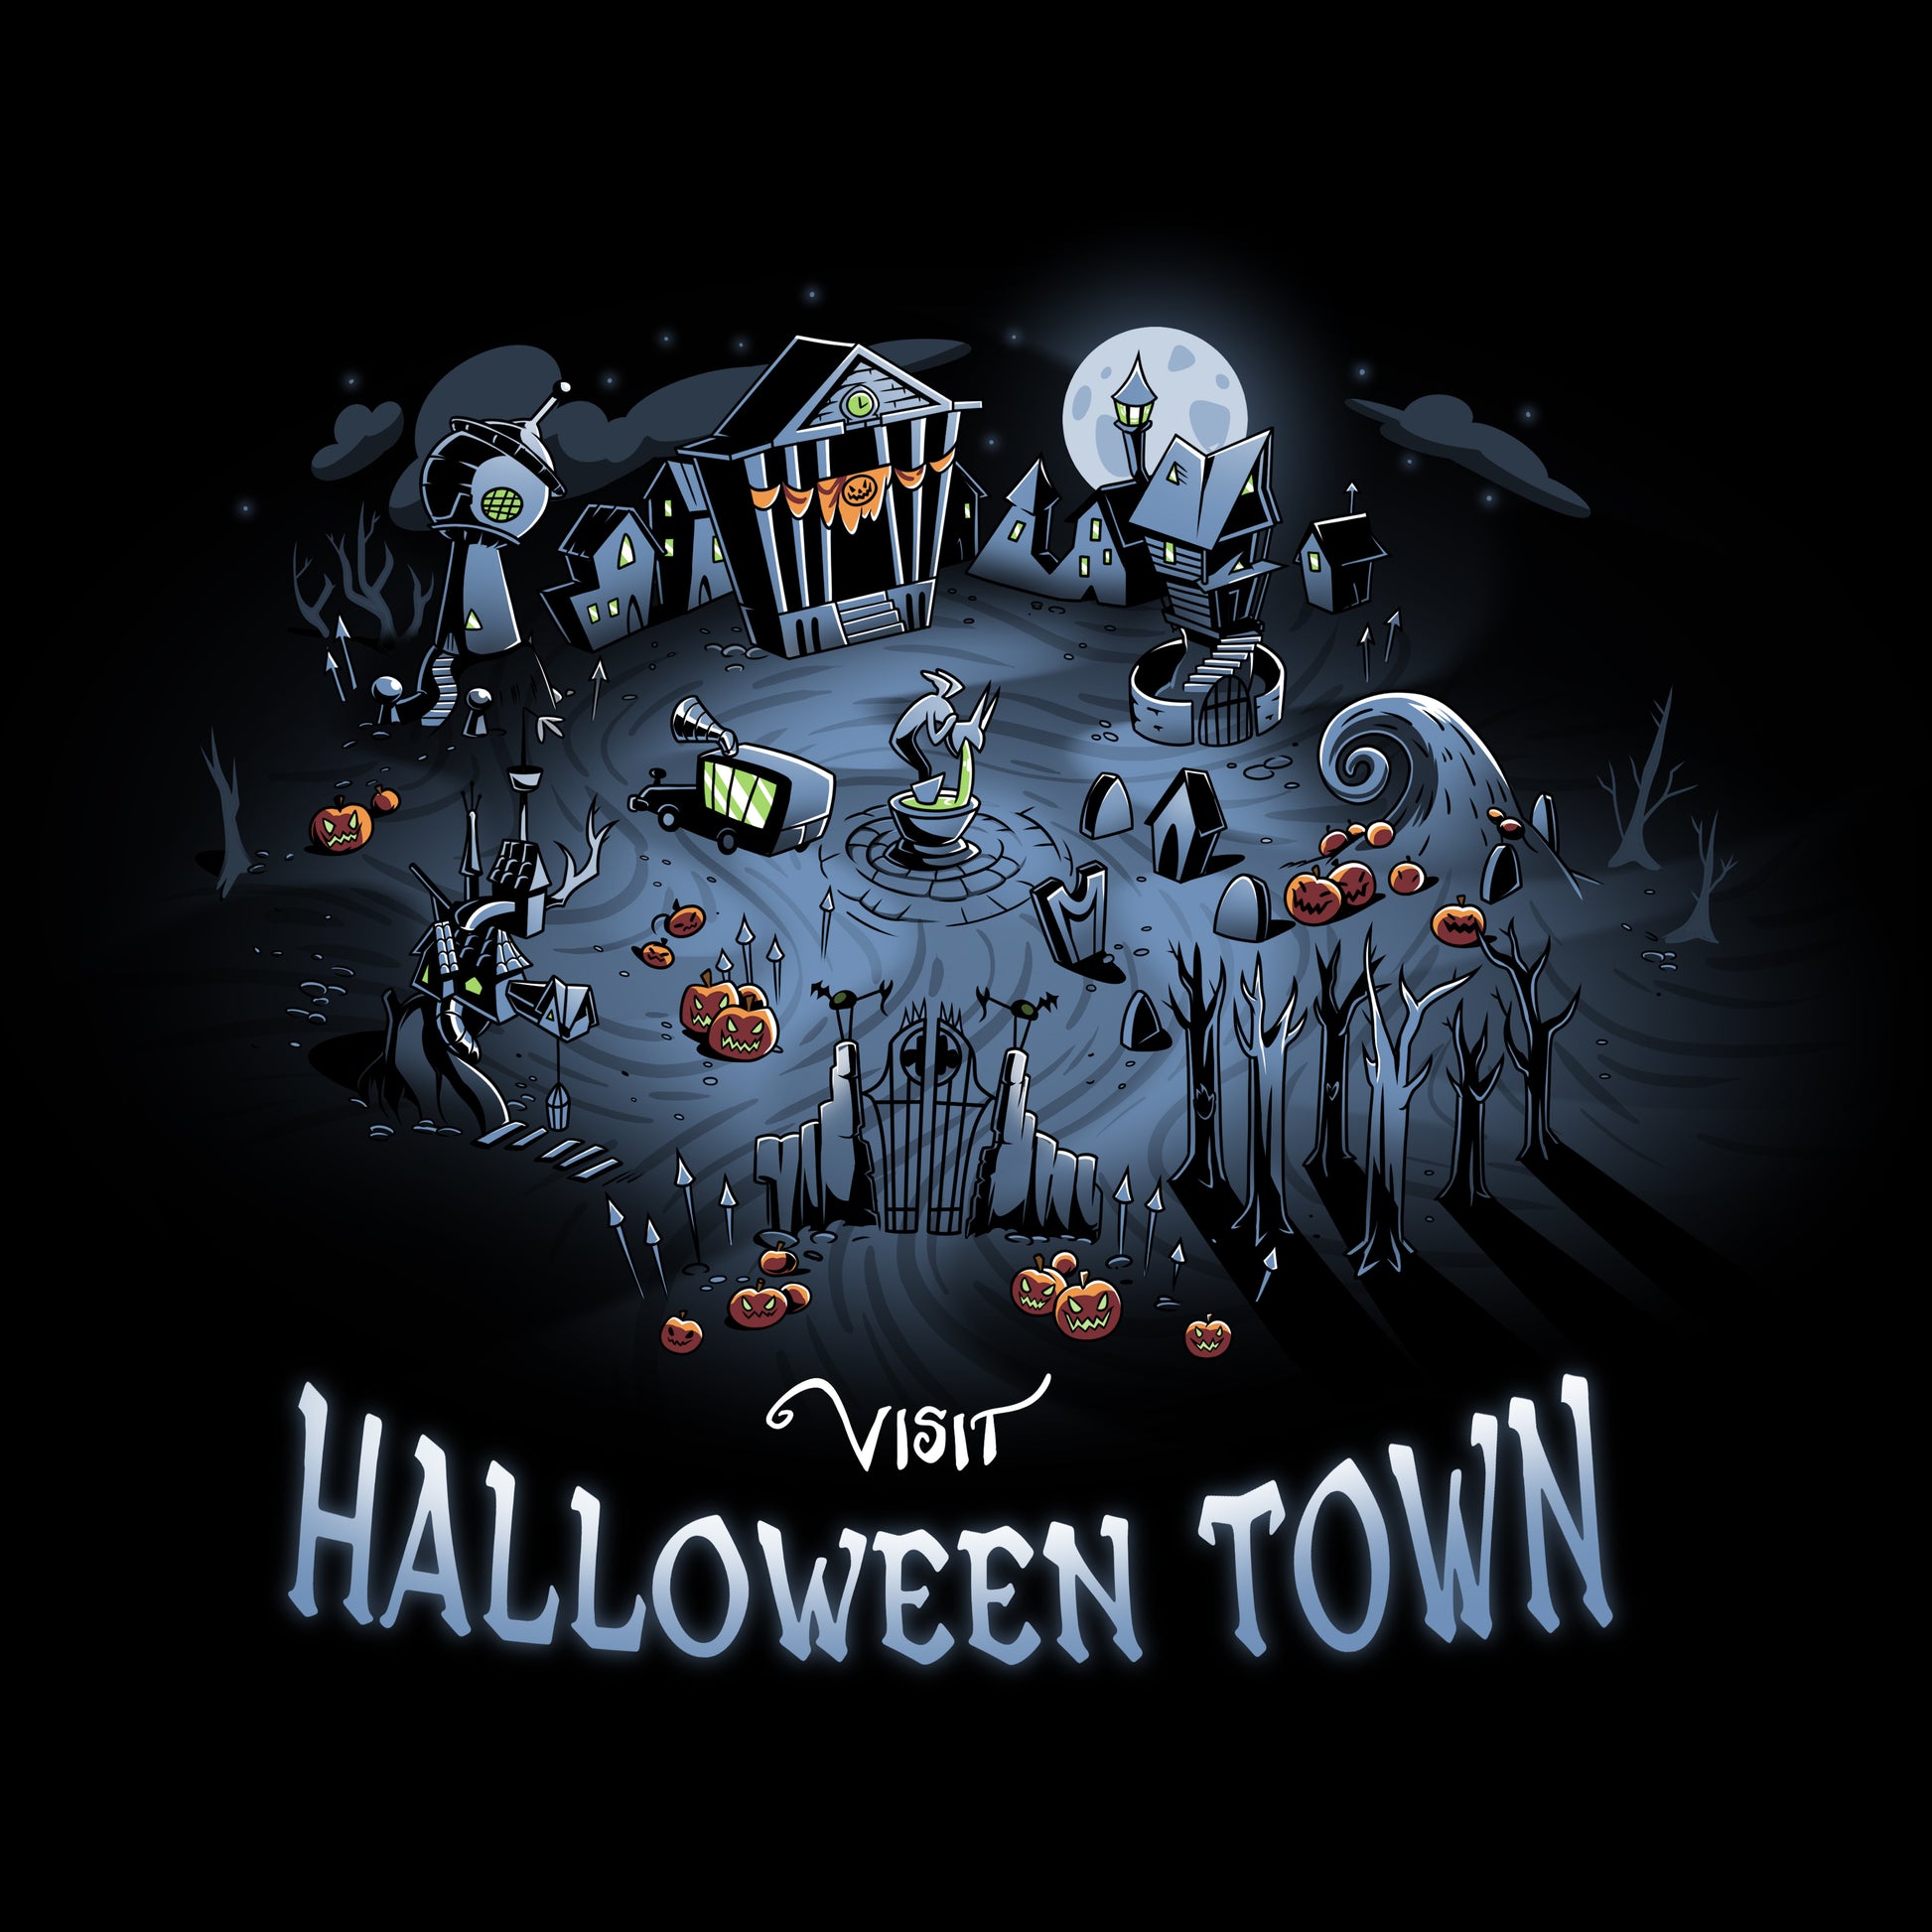 The Nightmare Before Christmas - Visit Halloween Town T-shirt.